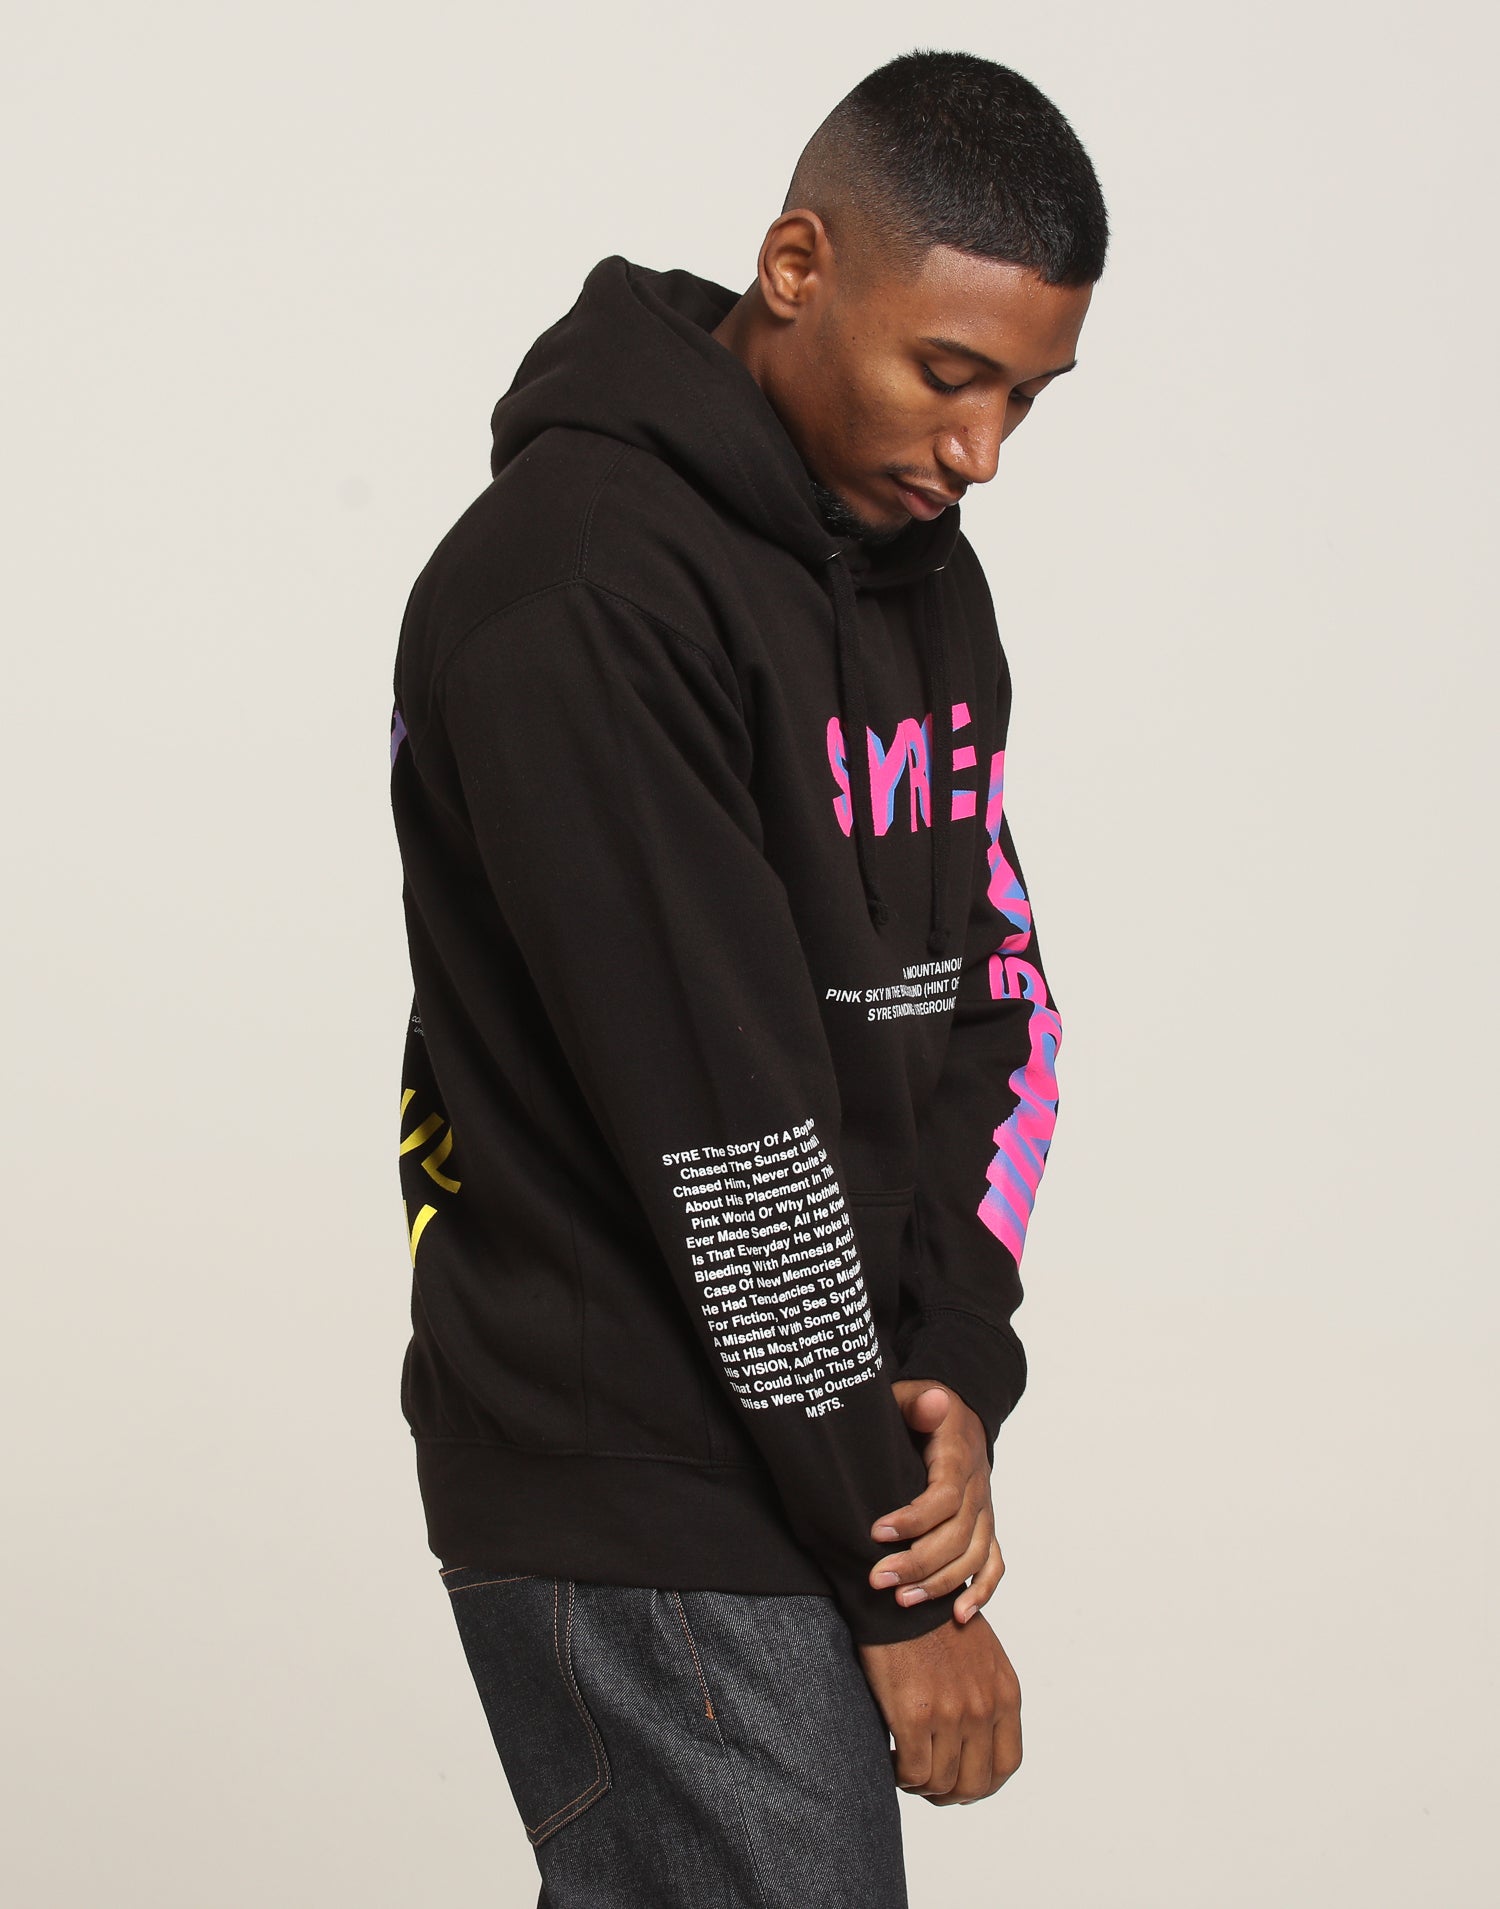 syre hoodie price